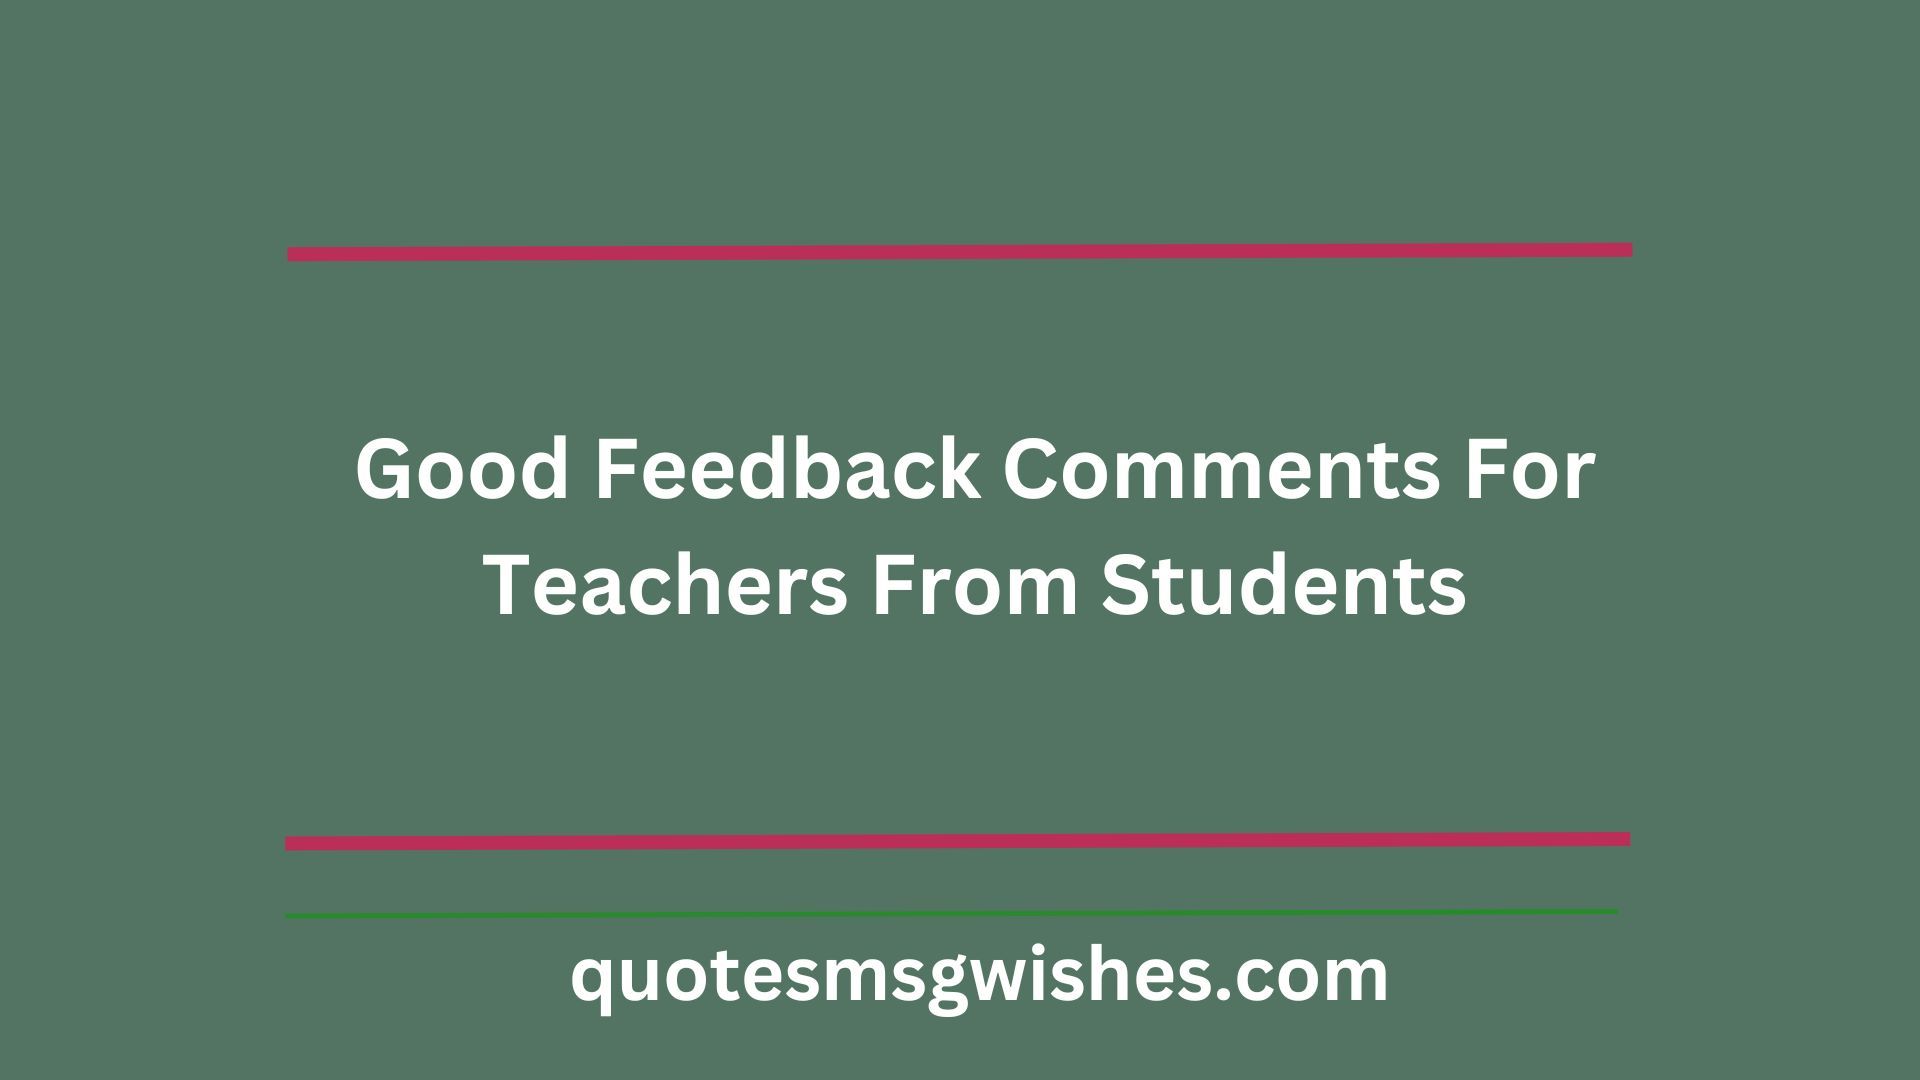 Good Feedback Comments For Teachers From Students